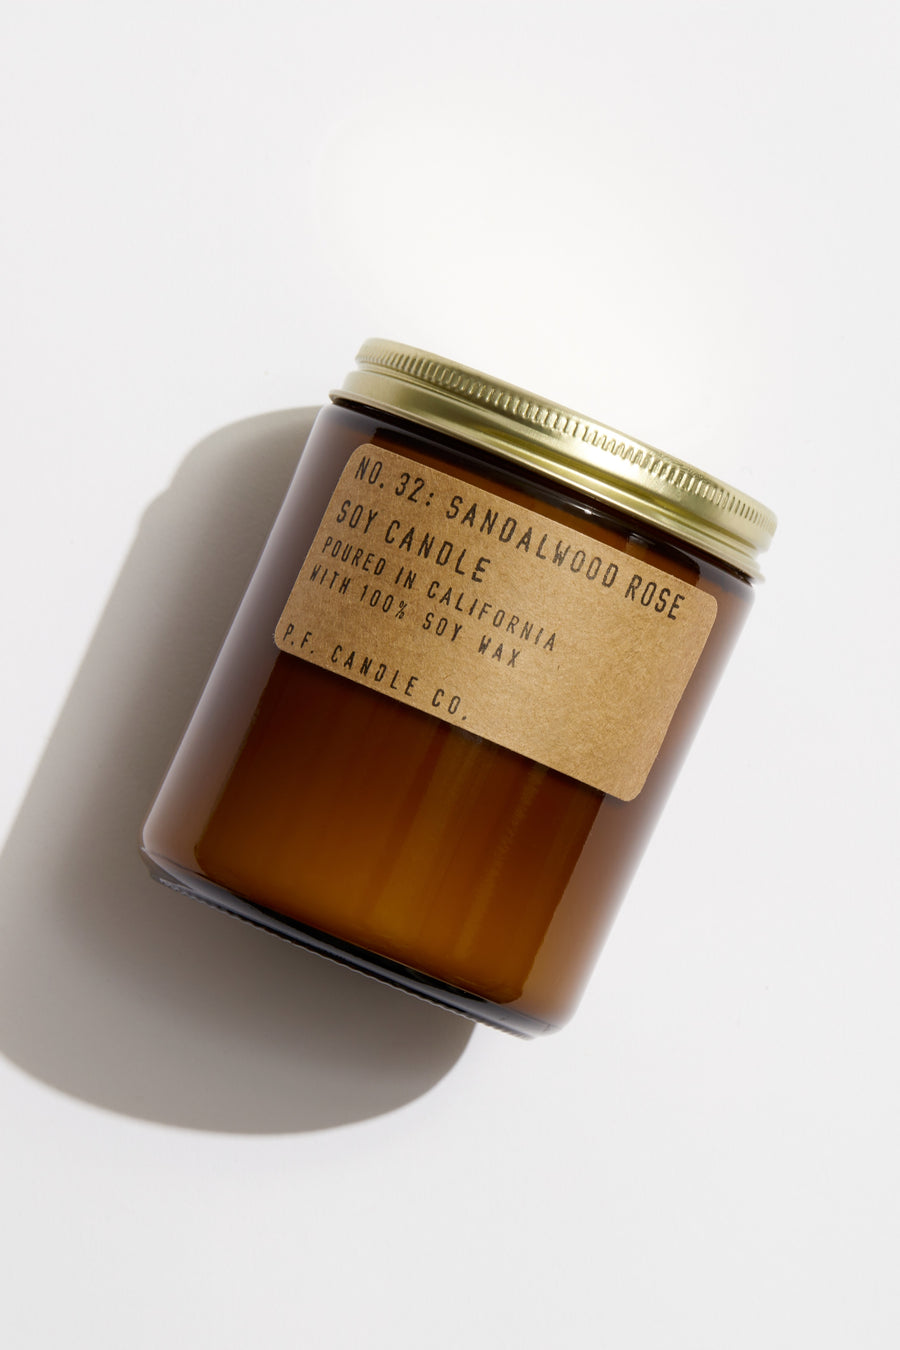 P.F. Candle Co. Standard Soy Candle - Sandalwood Rose